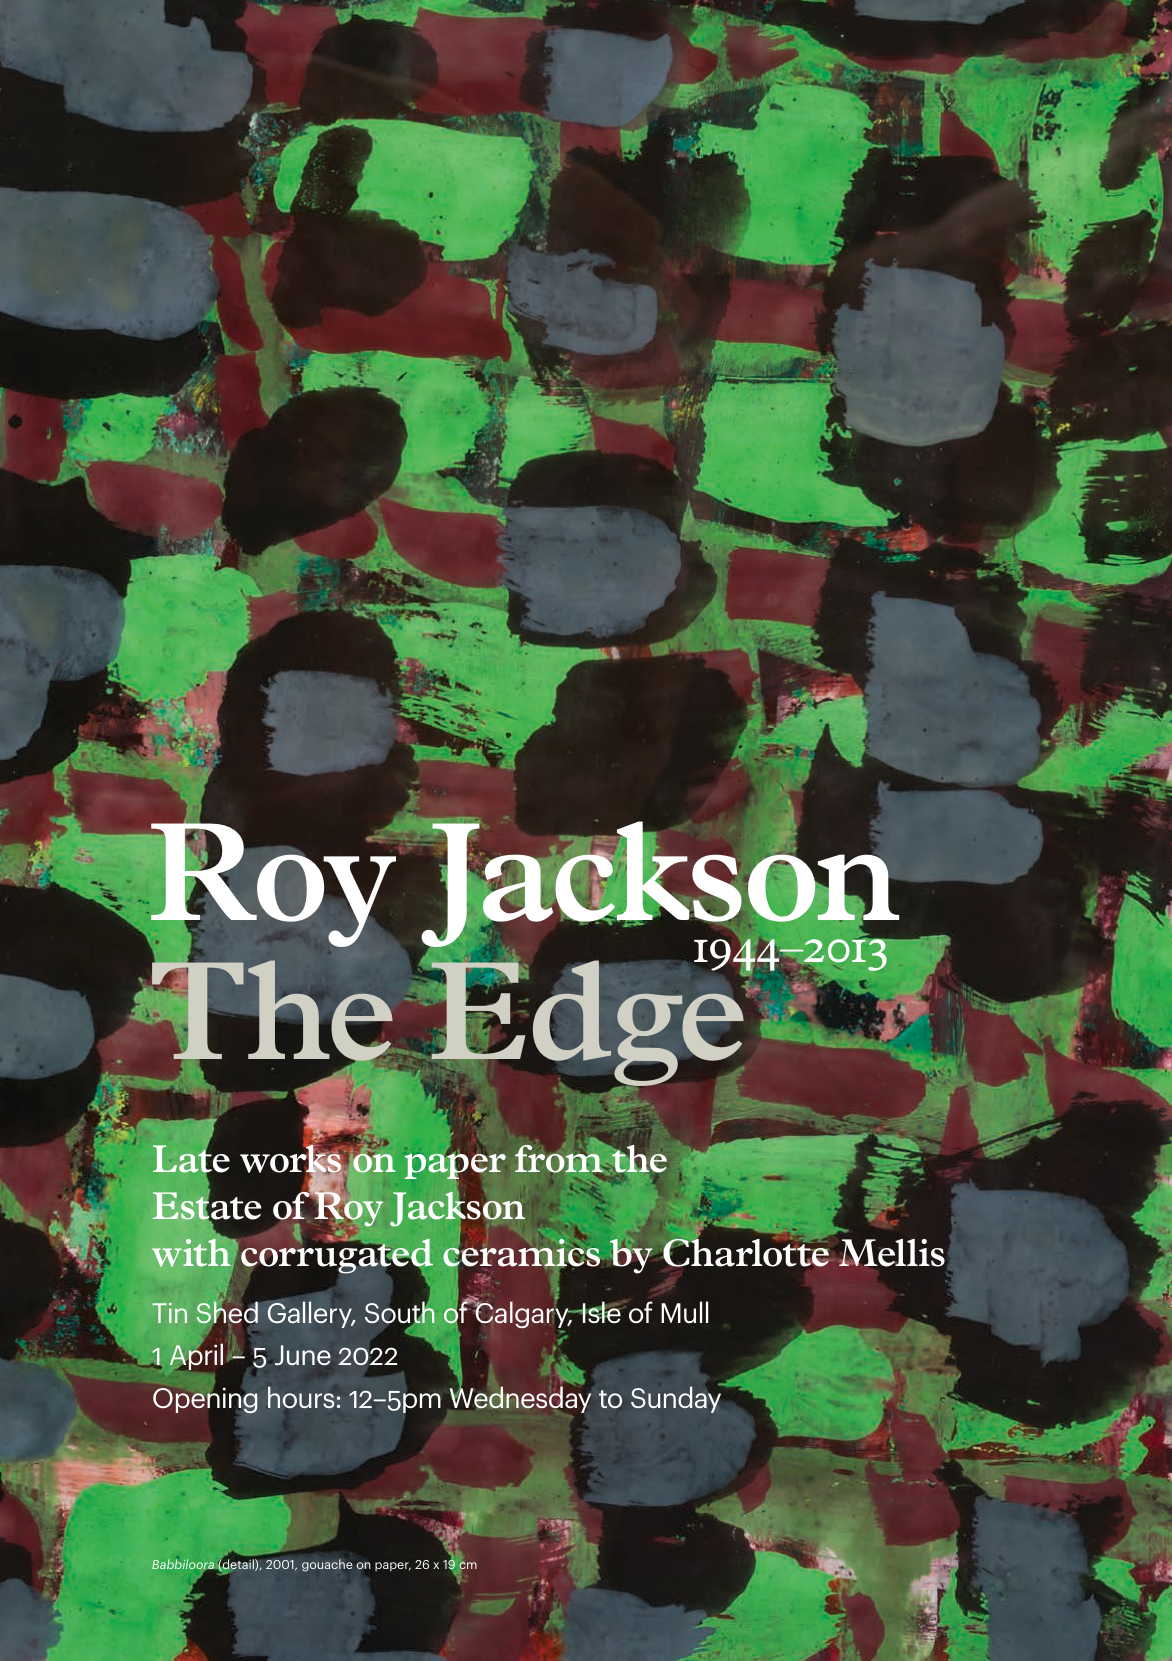 Roy Jackson The Edge Exhibition Poster, Roy Jackson, Late work on paper from the Estate of Roy Jackson with corrugated ceramics by Charlotte Mellis, artwork shown: Babbiloora (detail), 2001, gouache on paper, 26x19 cm